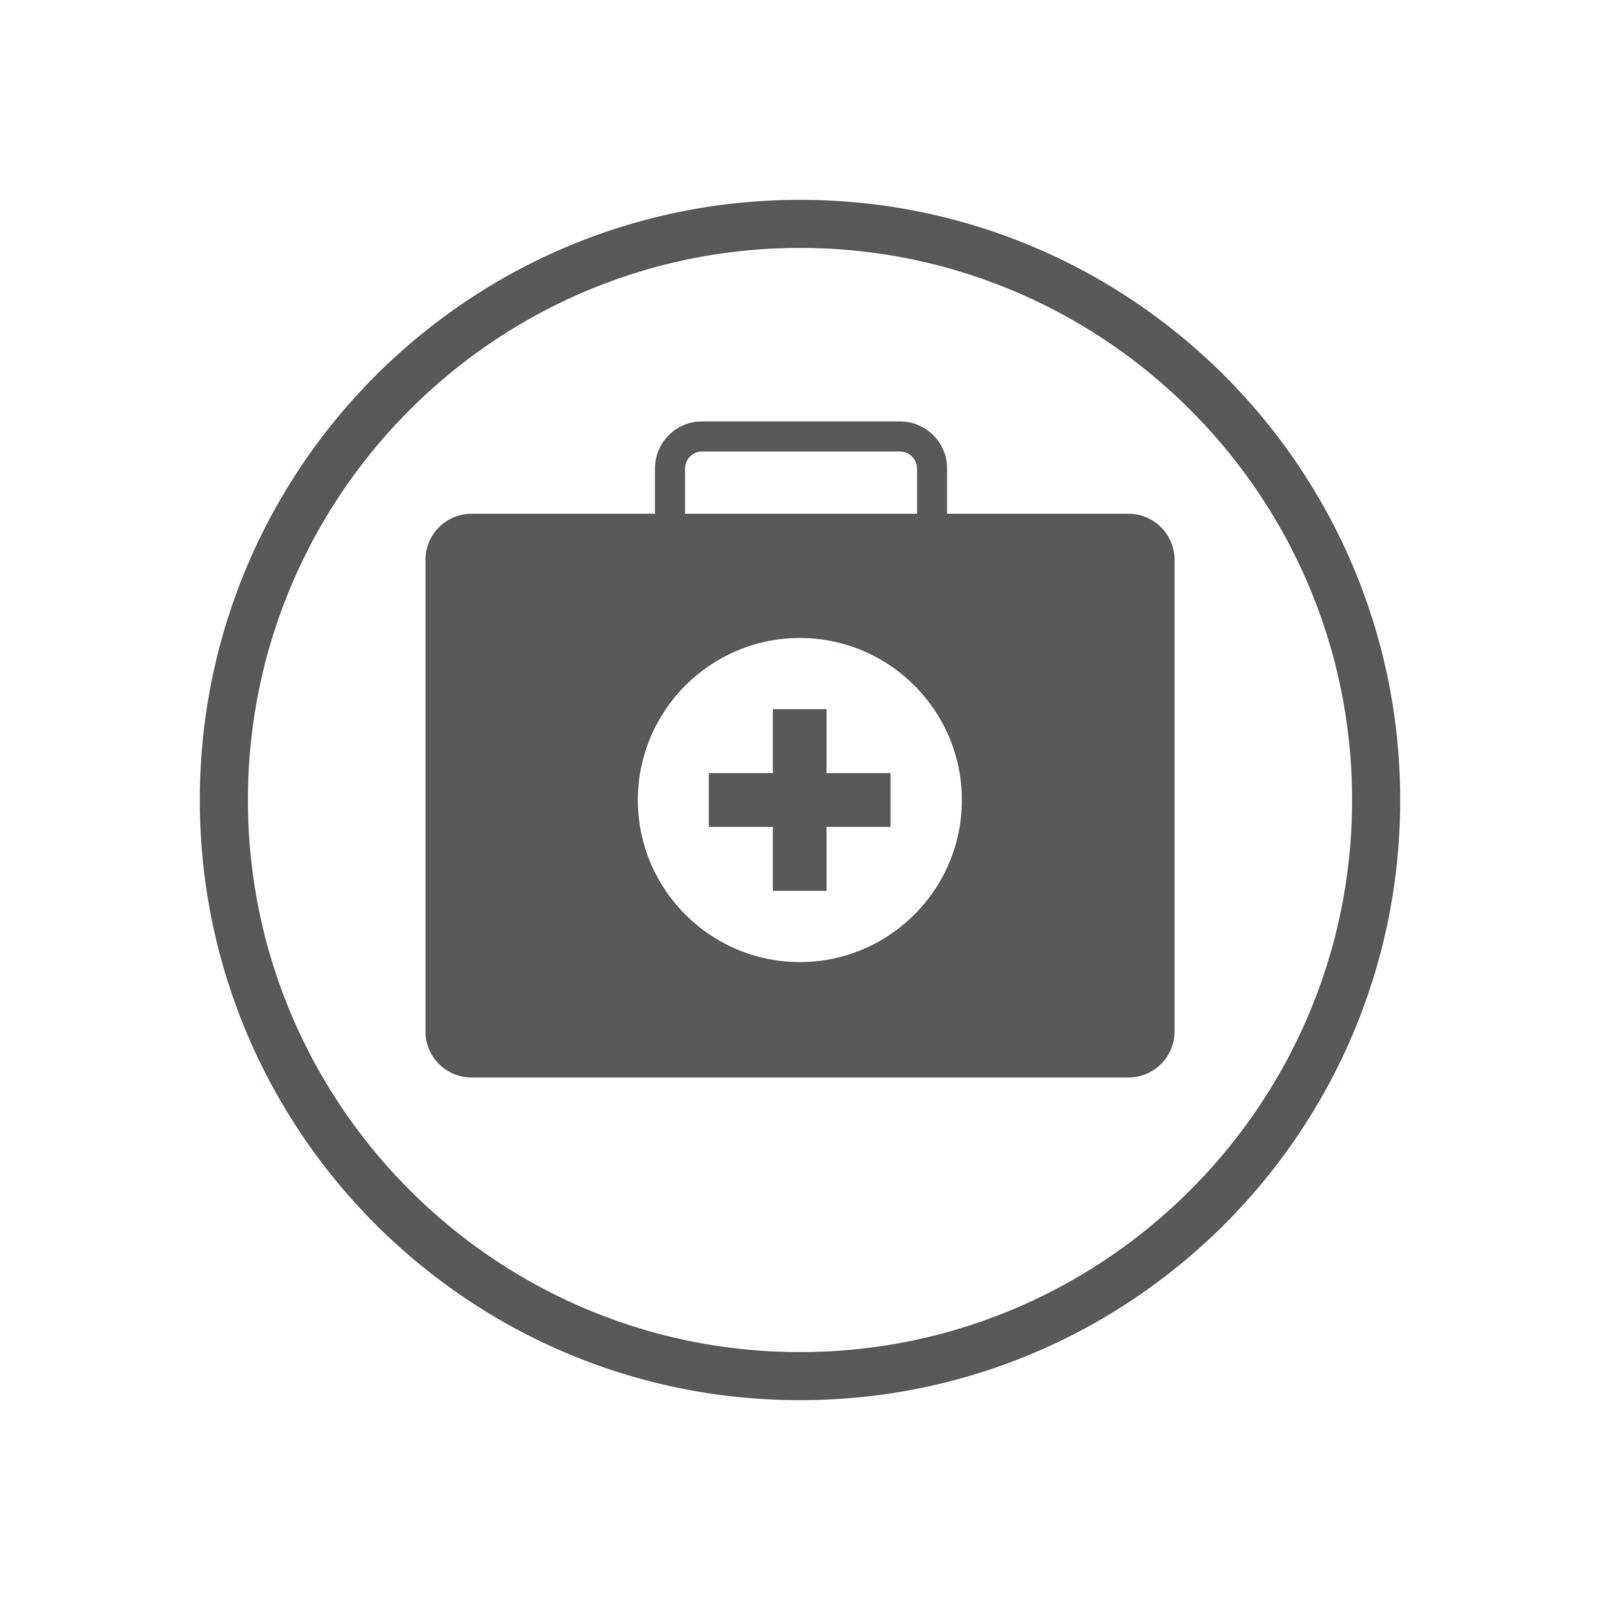 Linear First Aid Box icon - vector iconic design by solargaria